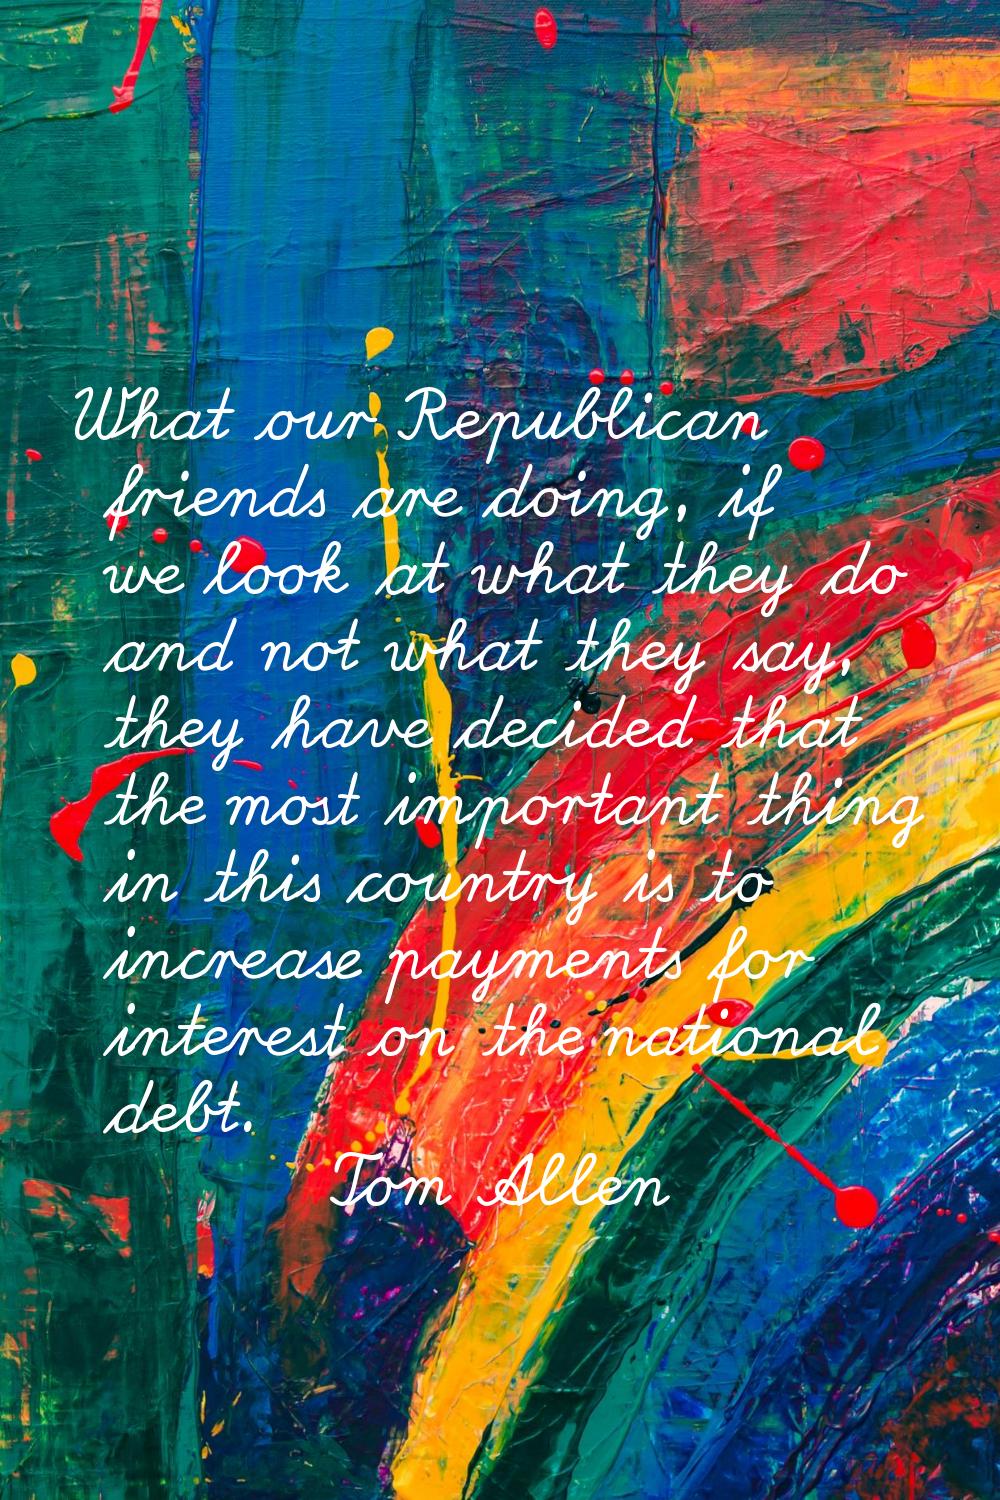 What our Republican friends are doing, if we look at what they do and not what they say, they have 